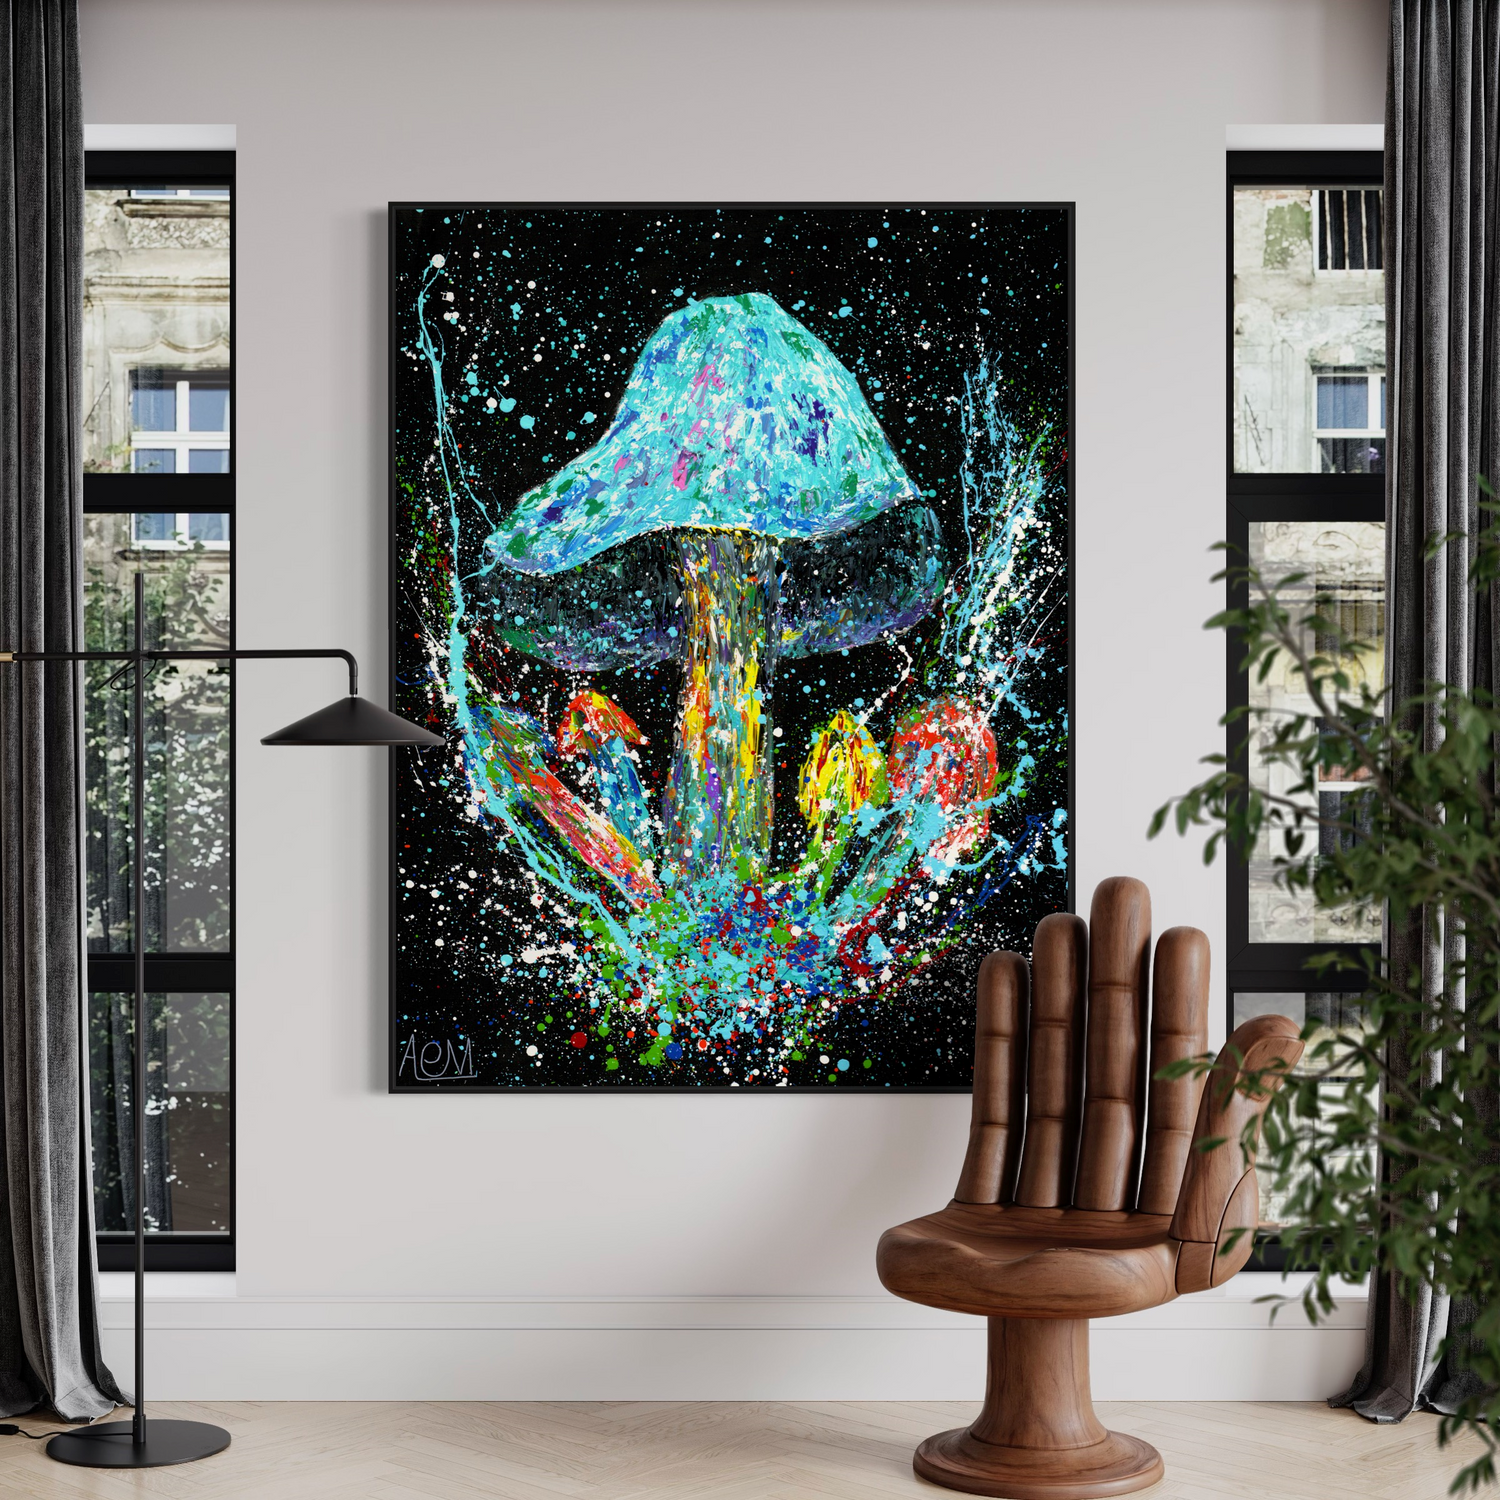 Striking, large-scale abstract painting of a neon-hued mushroom against a black backdrop, paired with a unique hand-shaped wooden chair in an urban room with a floor-to-ceiling window and lush greenery.